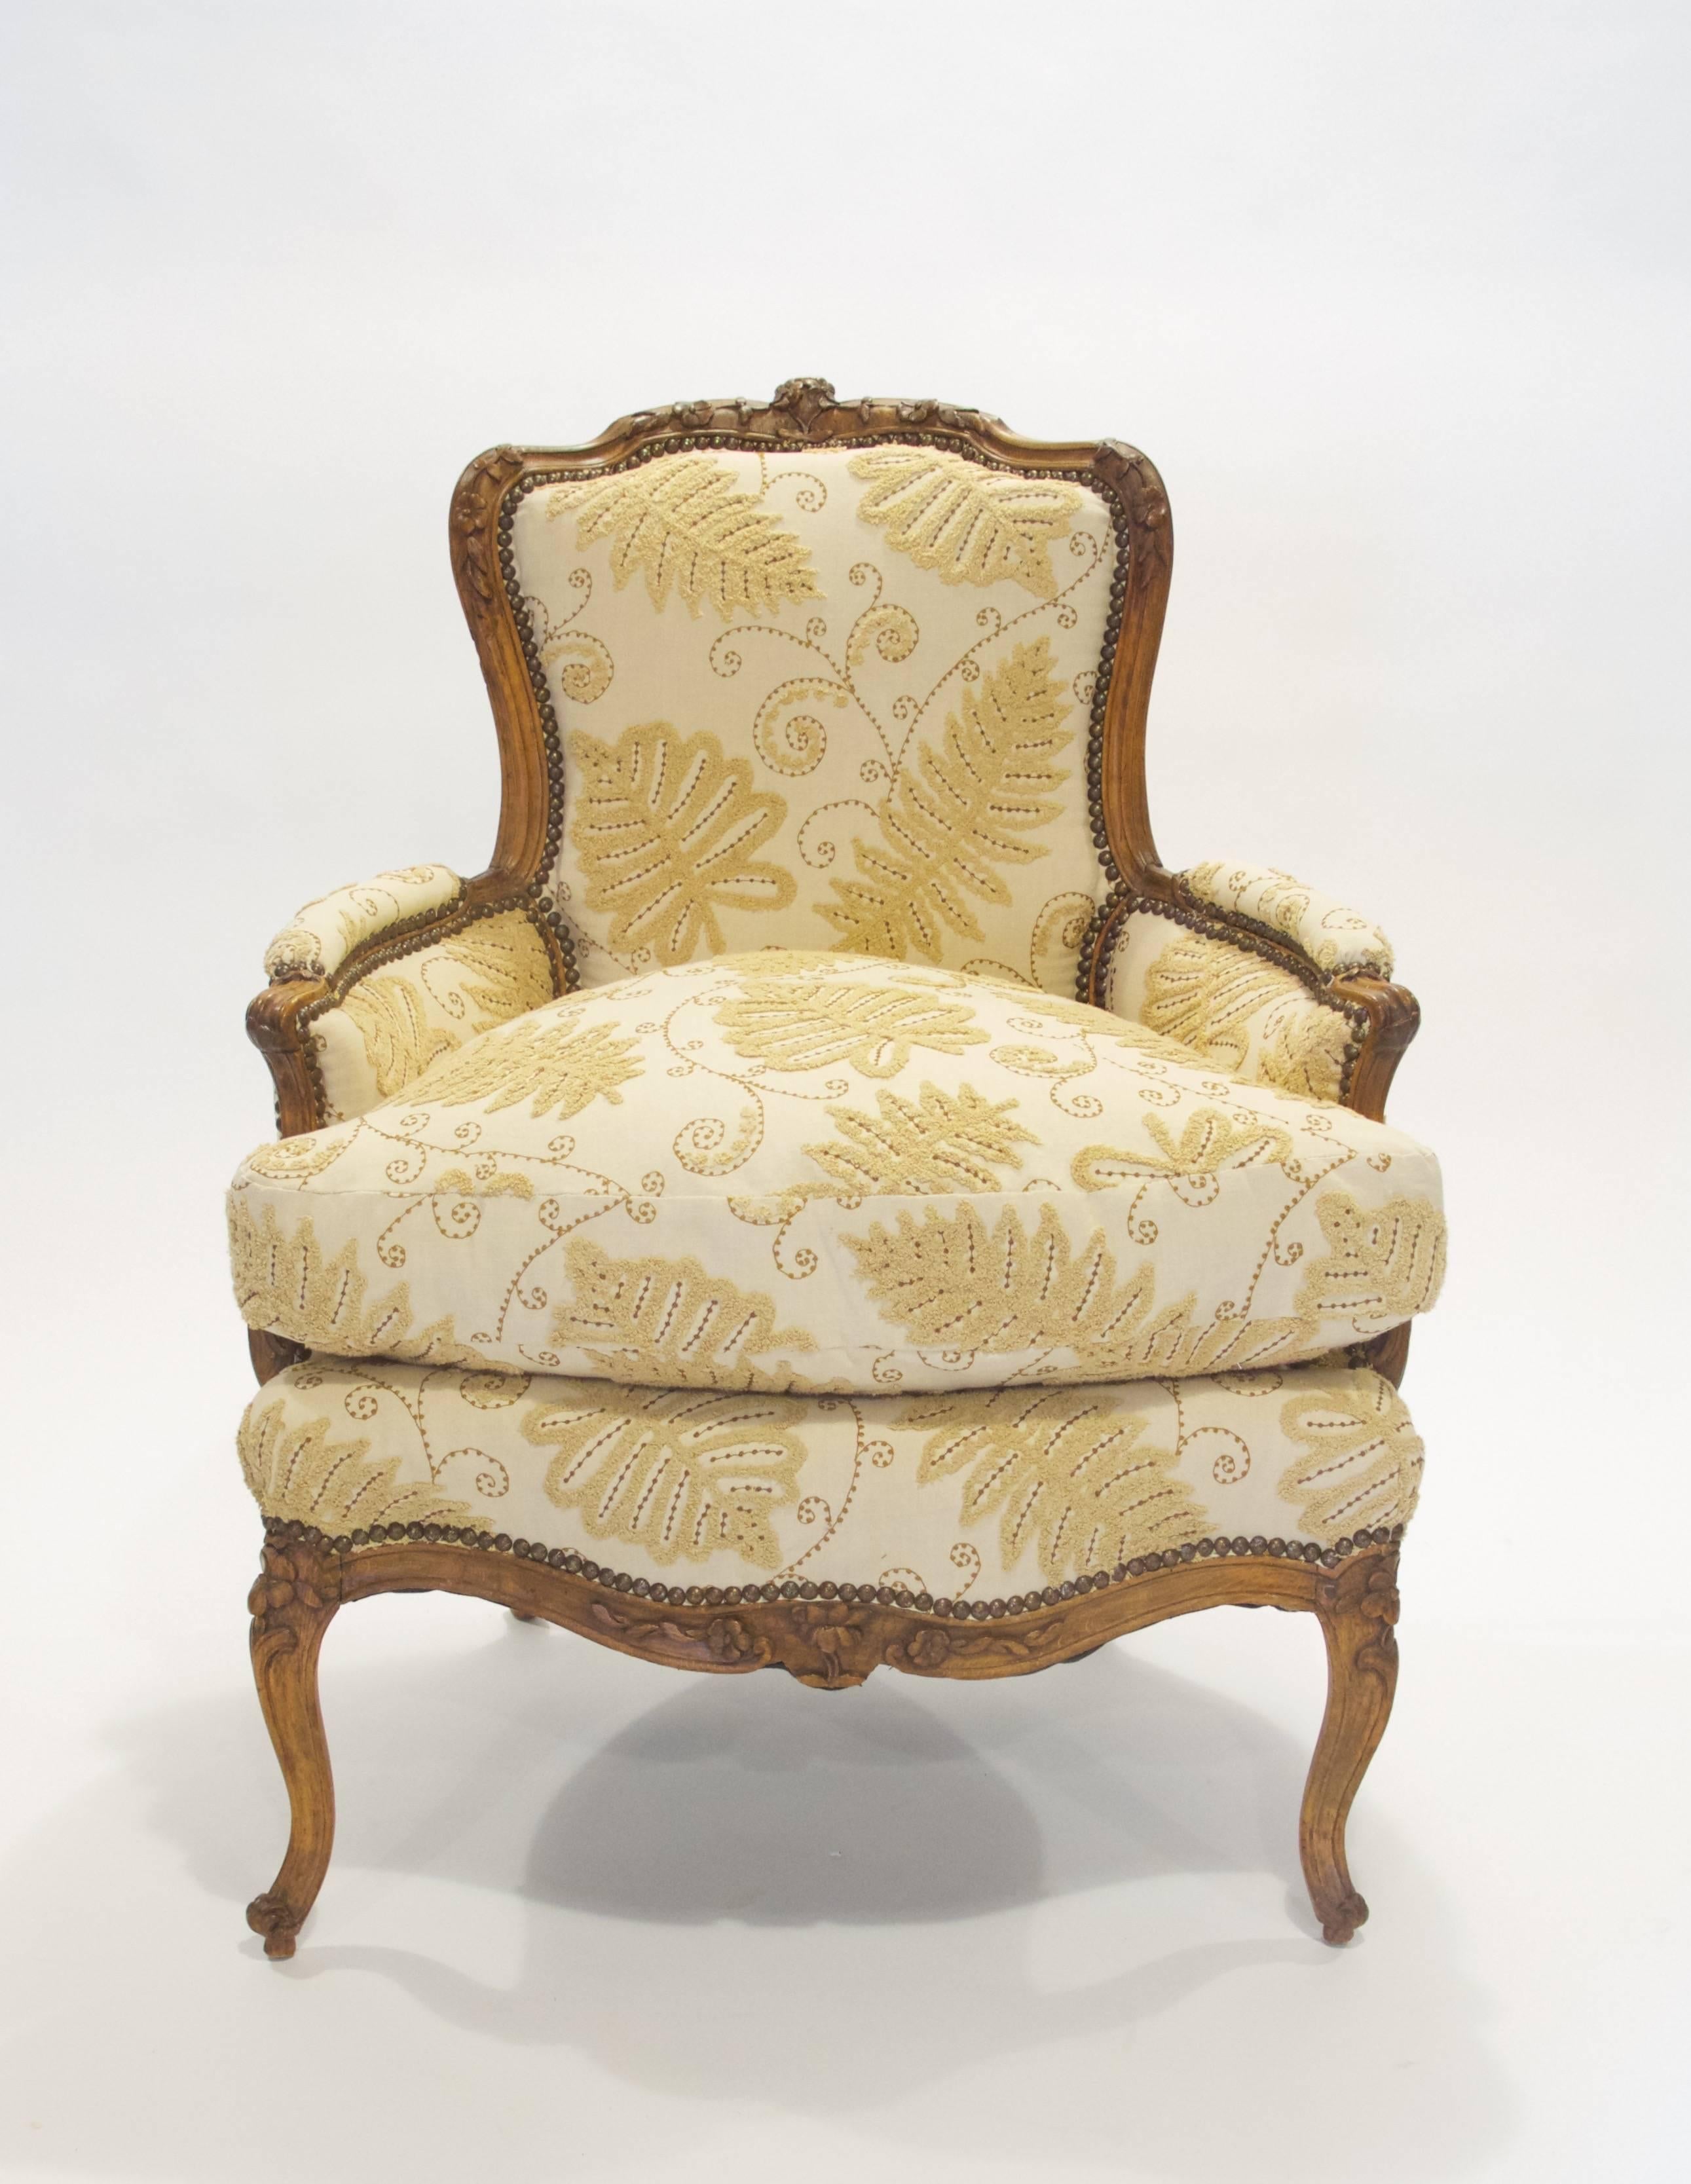 This French, Louis XV period beechwood armchair (bergère) has a shaped back with carved floral motifs, raised on cabriole legs. The bergère was formerly in the collection of the Phipps family, Long Island.